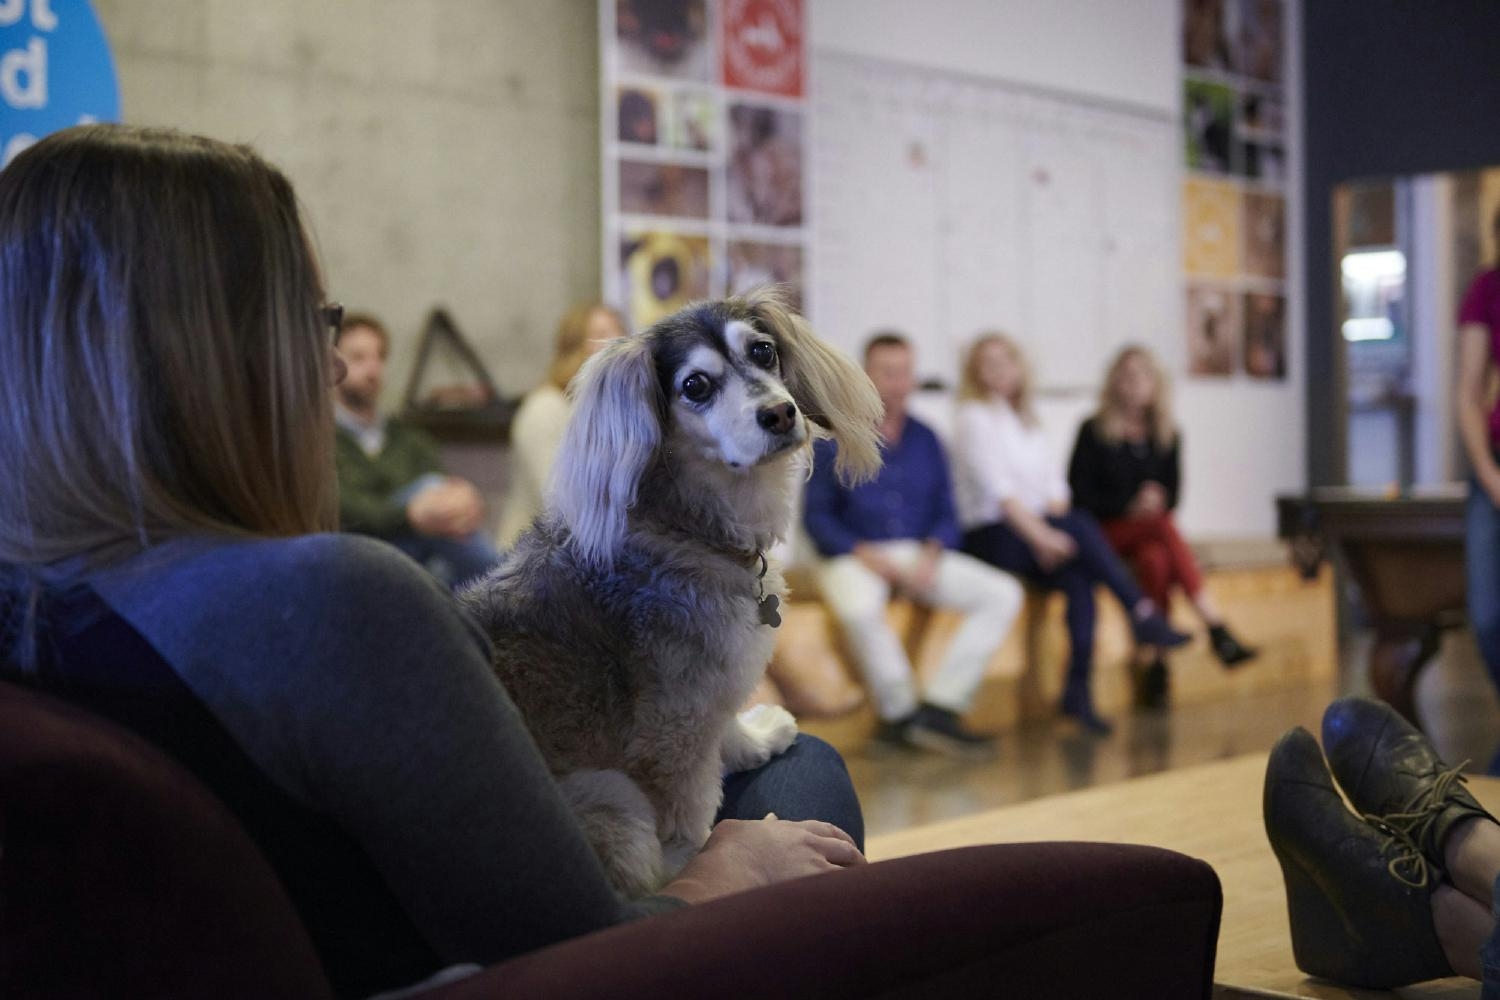 You can always find a friendly companion to join you for team meetings.